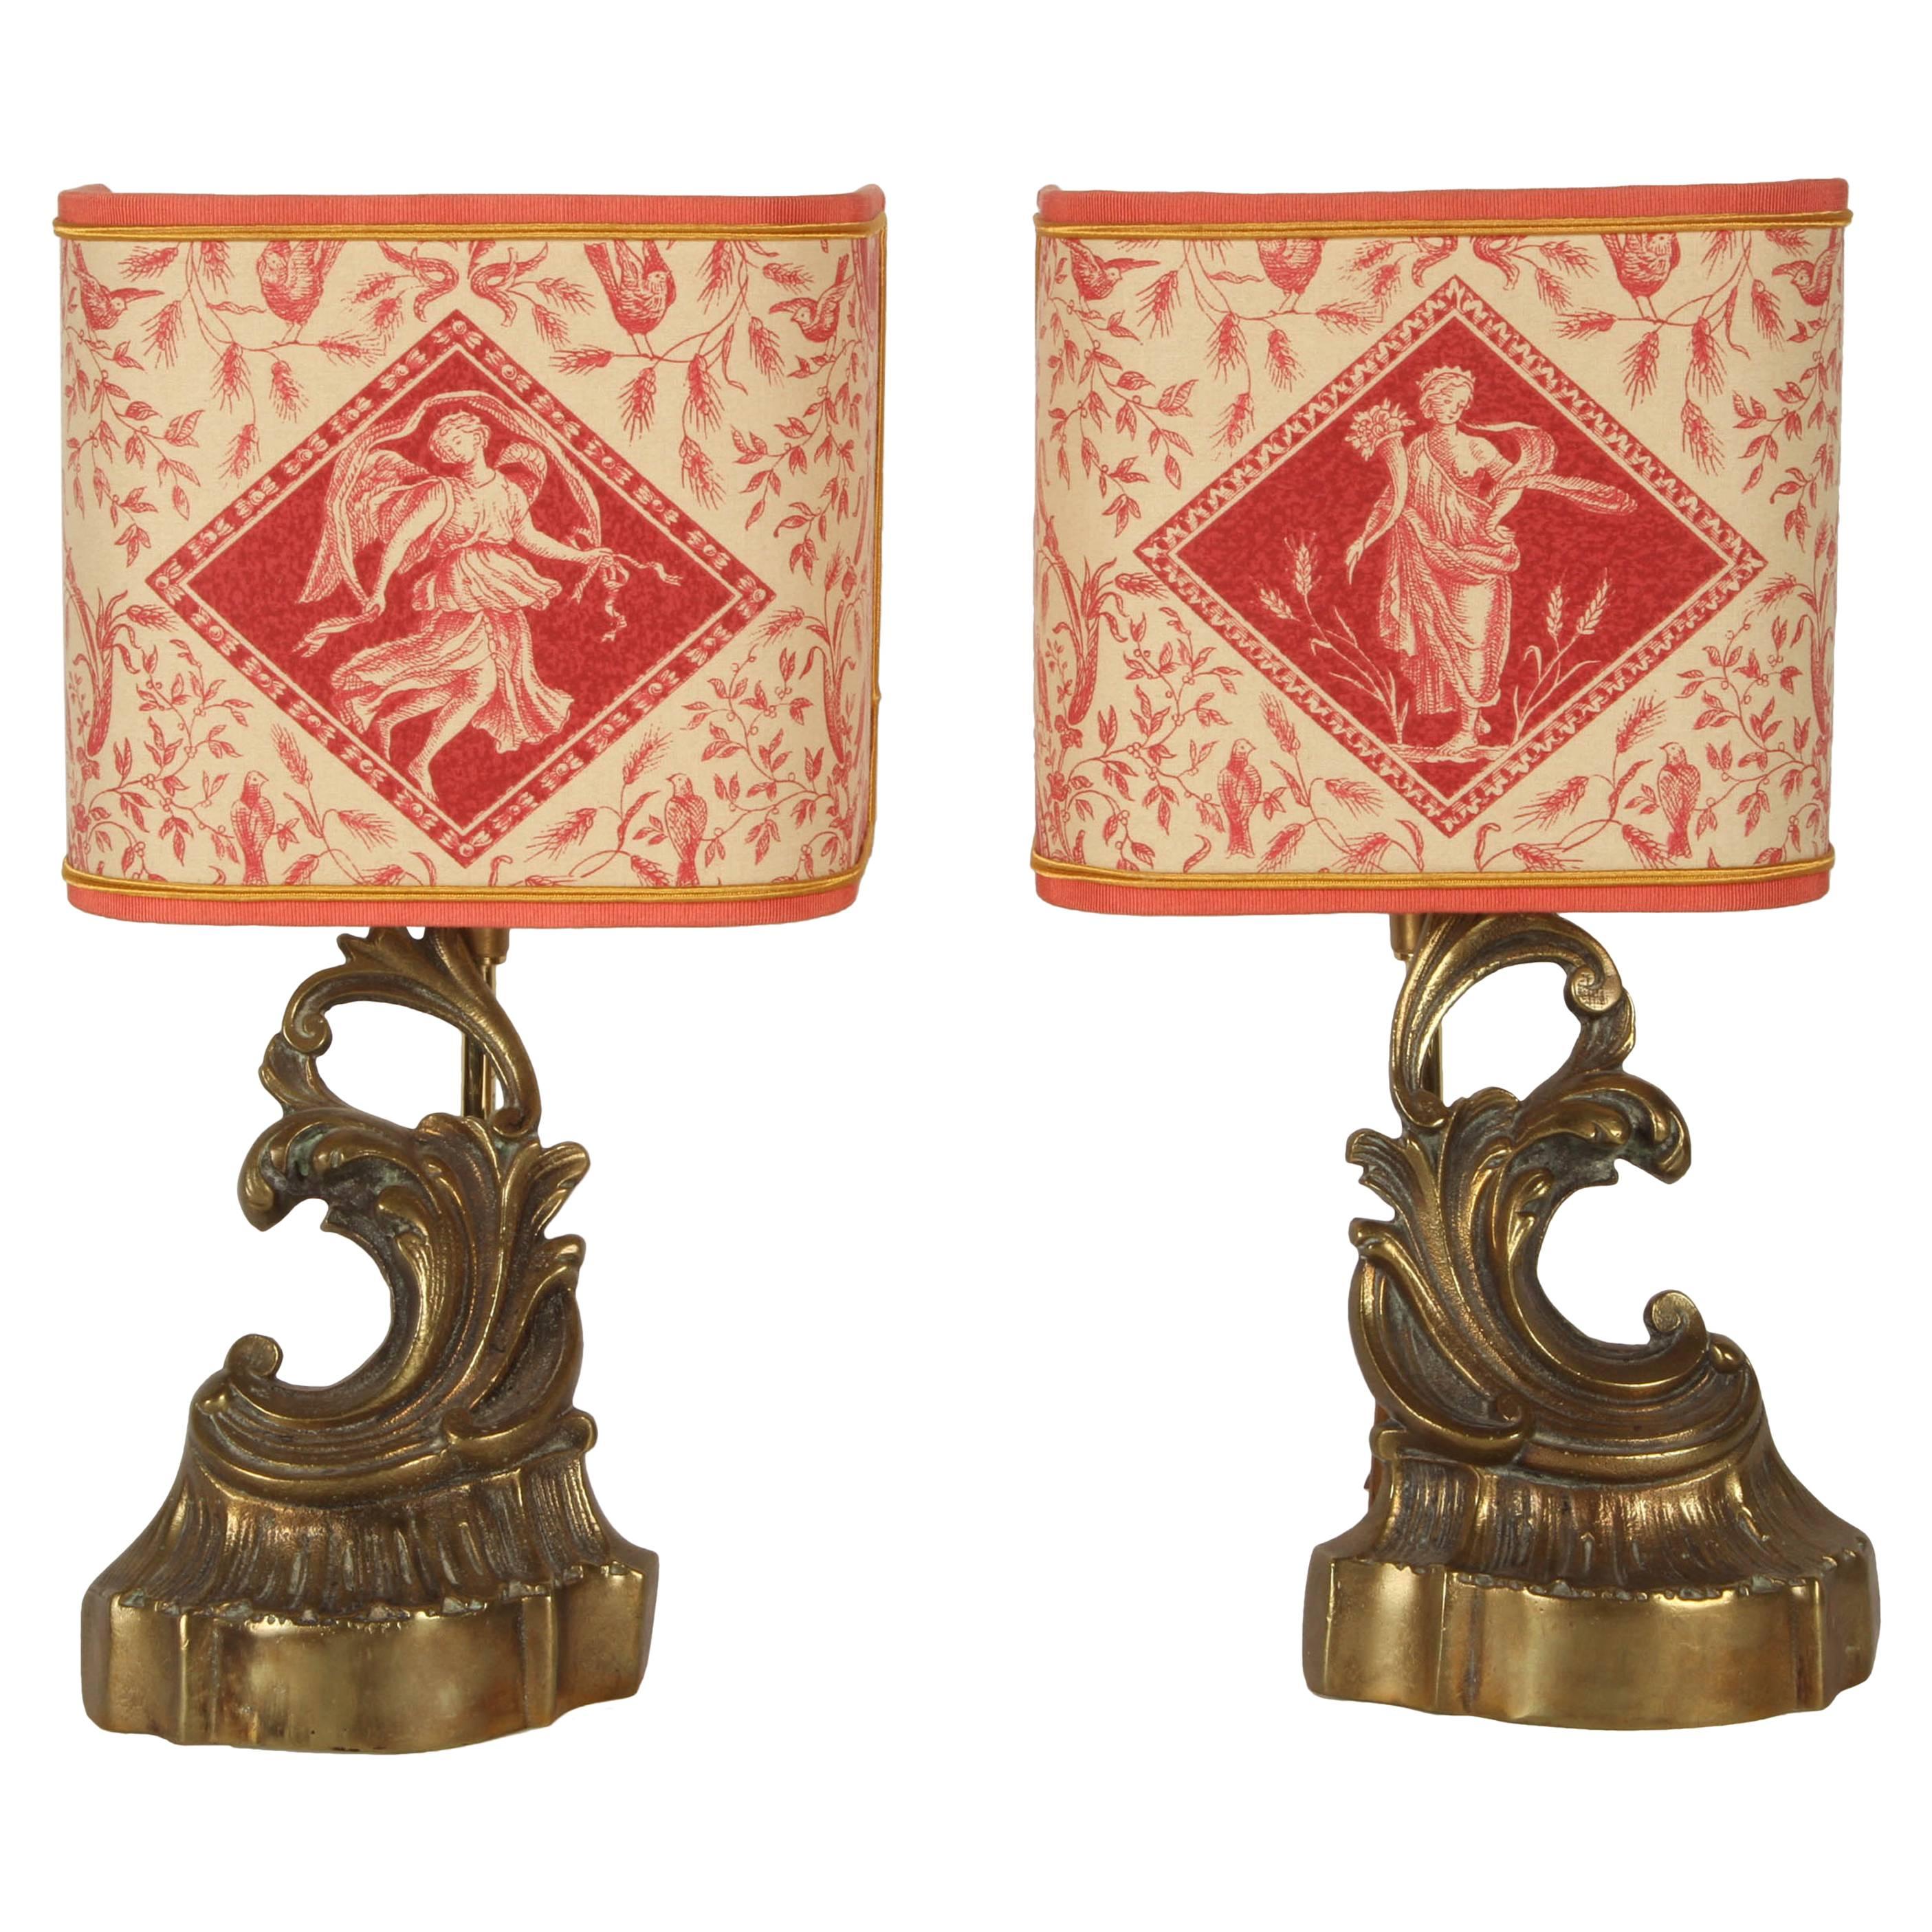 Pair of 19th Century French Andiron Lamps